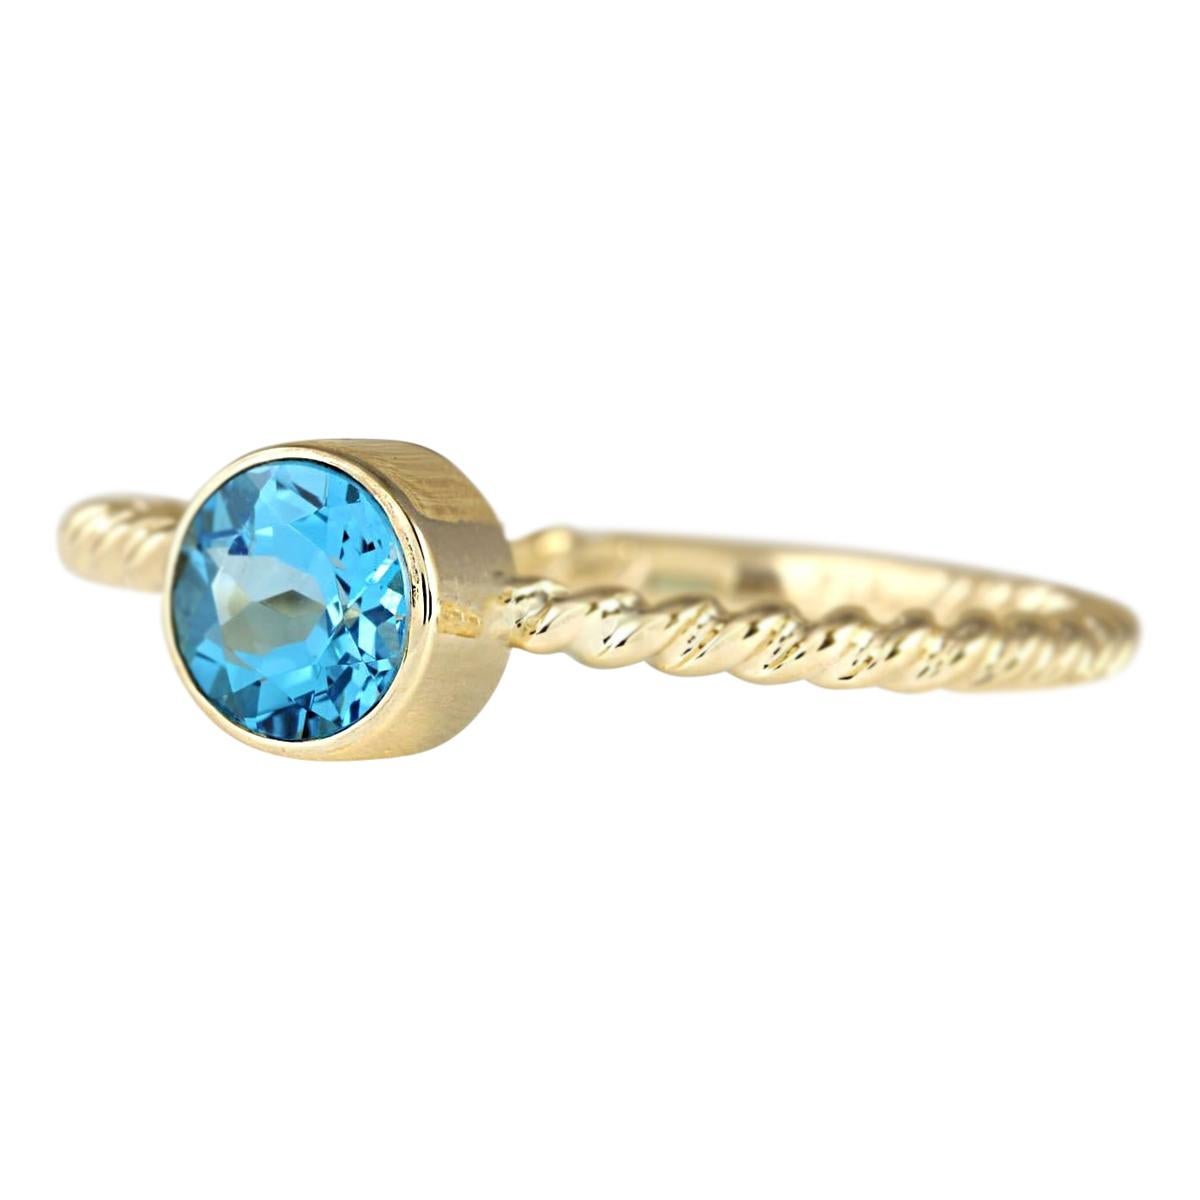 Stamped: 14K Yellow Gold
Total Ring Weight: 2.2 Grams
Total Natural Topaz Weight is 1.00 Carat
Color: Blue
Face Measures: 6.00x6.00 mm
Sku: [703223W]